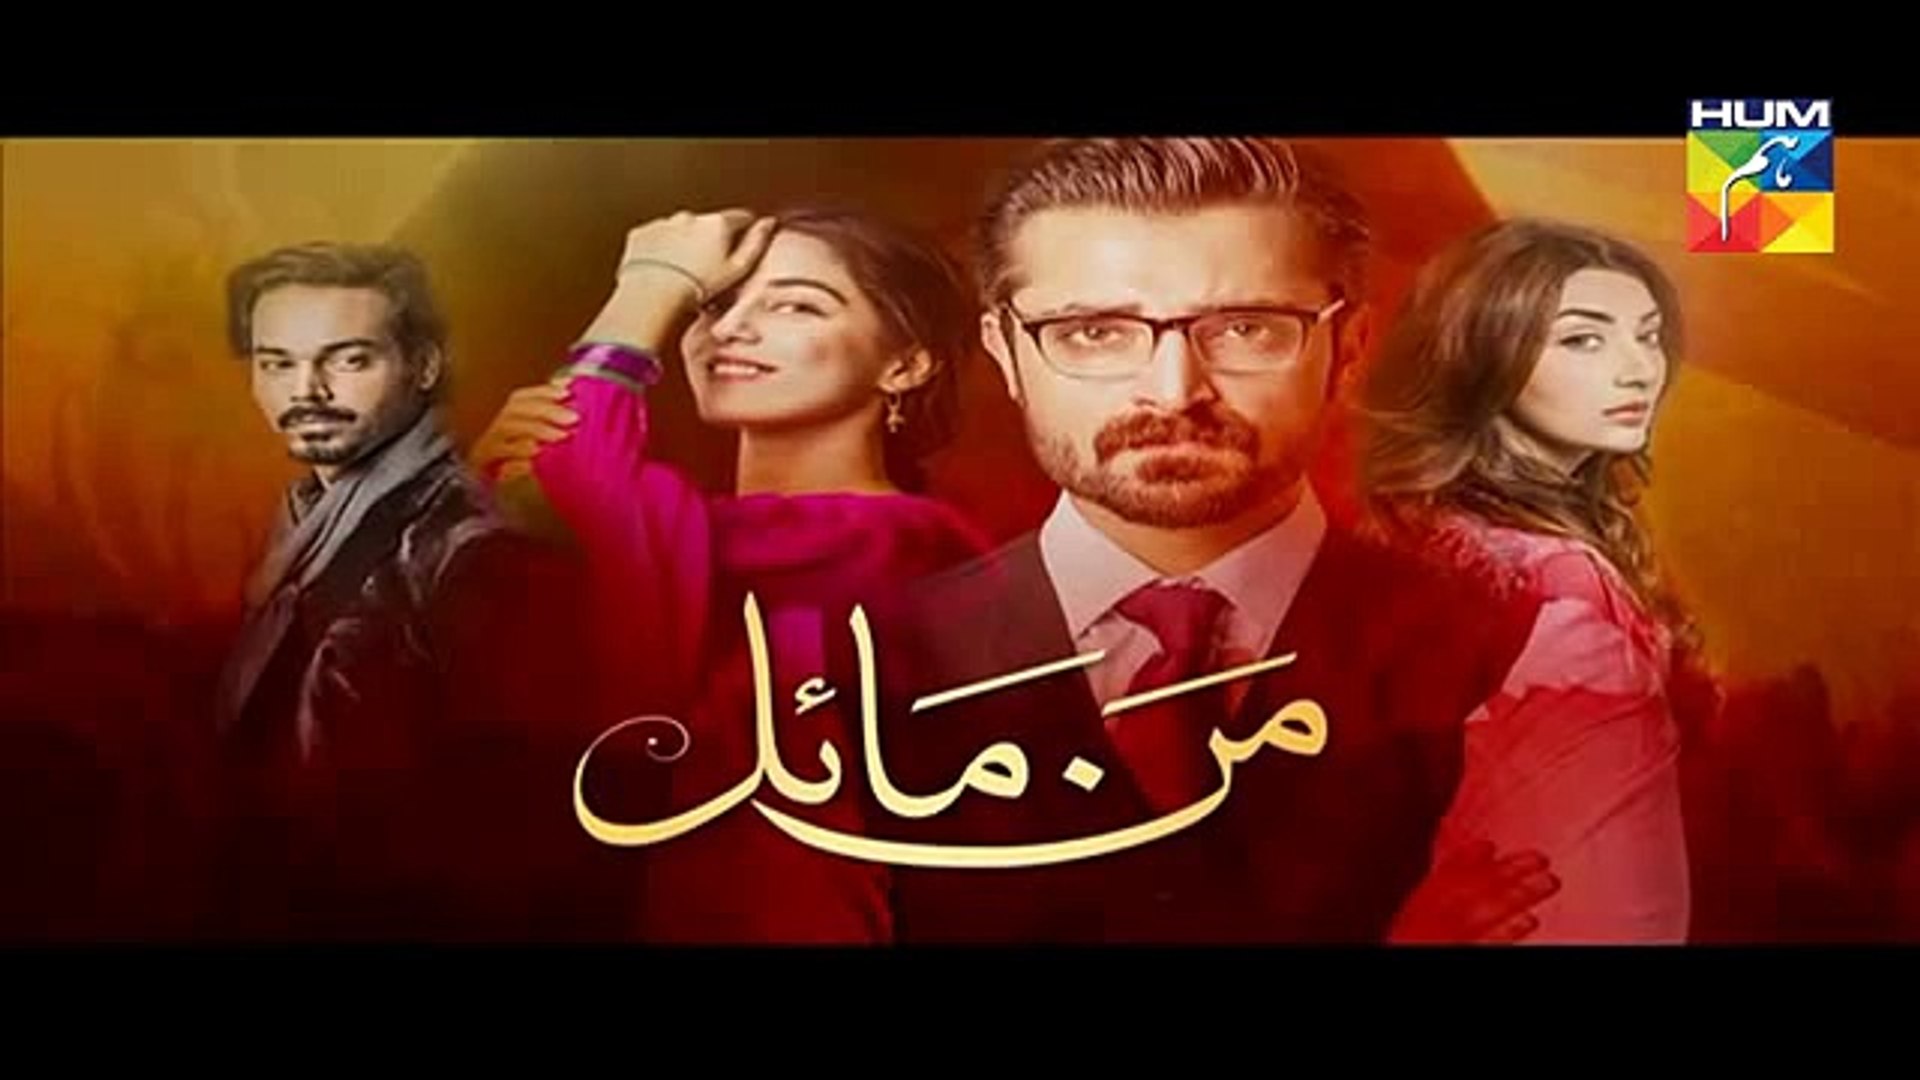 Mann Mayal Episode 14 Promo Mann Mayal full episode 13 top songs 2016 best songs new songs upcoming 